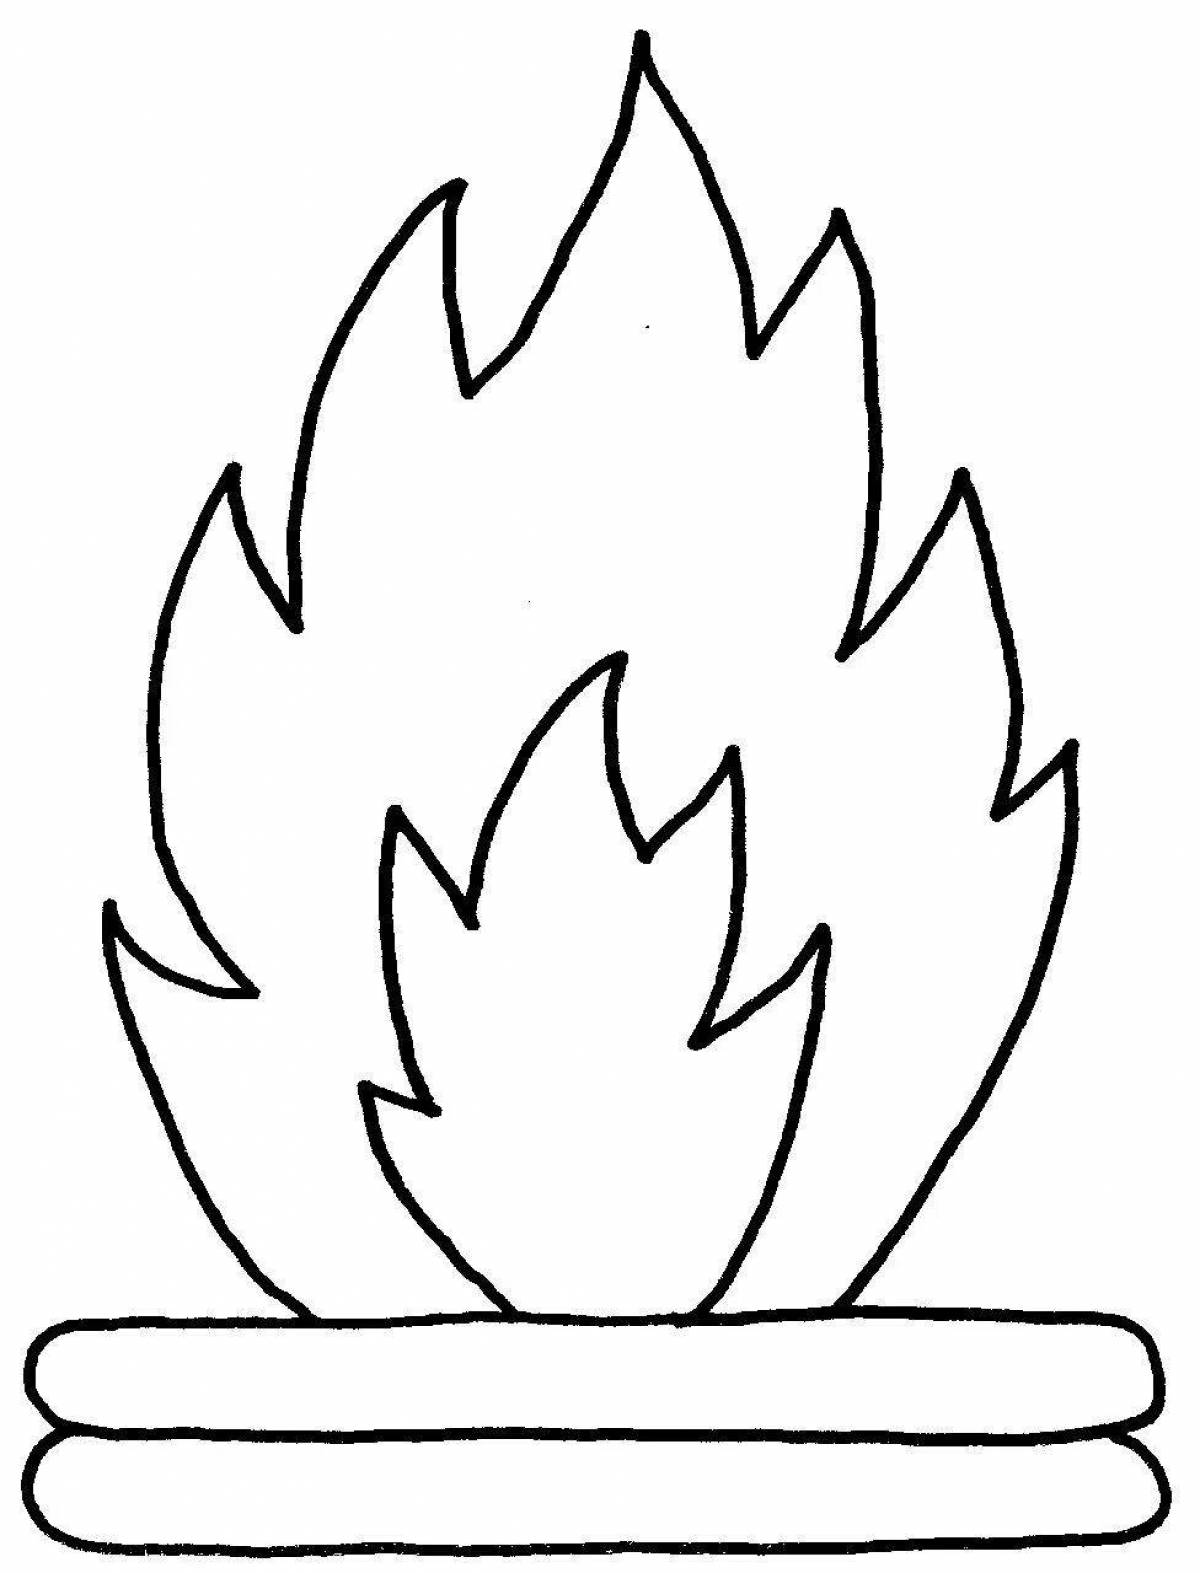 Incandescent flame coloring pages